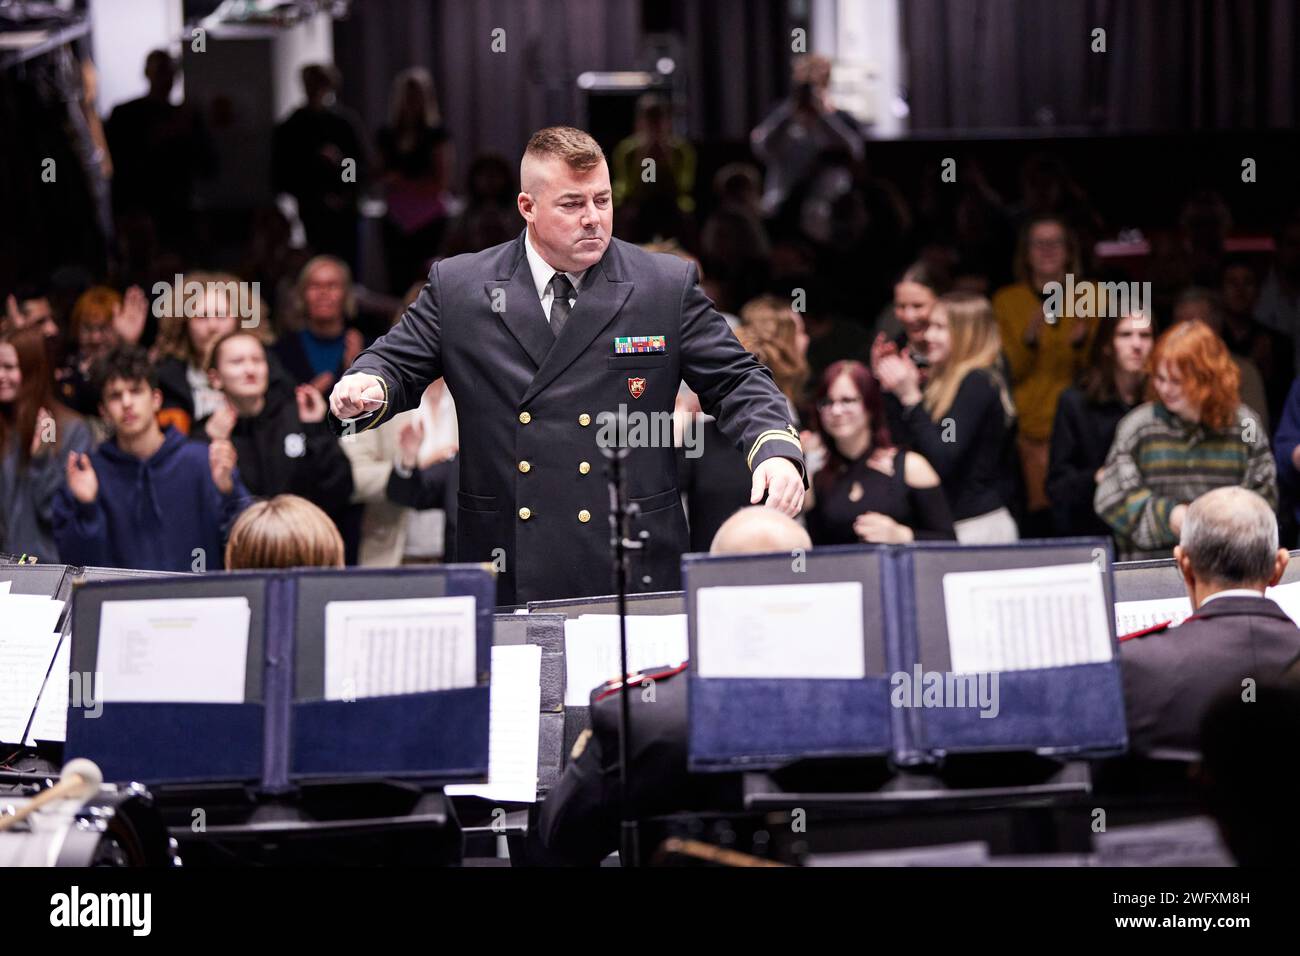 U.S. Navy Lt. j.g. Matt Stuver, assistant director, U.S. Naval Forces Europe and Africa band, conducts during a concert at Vaskivuori High School, in Vantaa, Finland, Jan. 30, 2024. The event included a workshop and culminated in a performance aimed at fostering interaction and mentorship between the service members and the school's students. Stock Photo